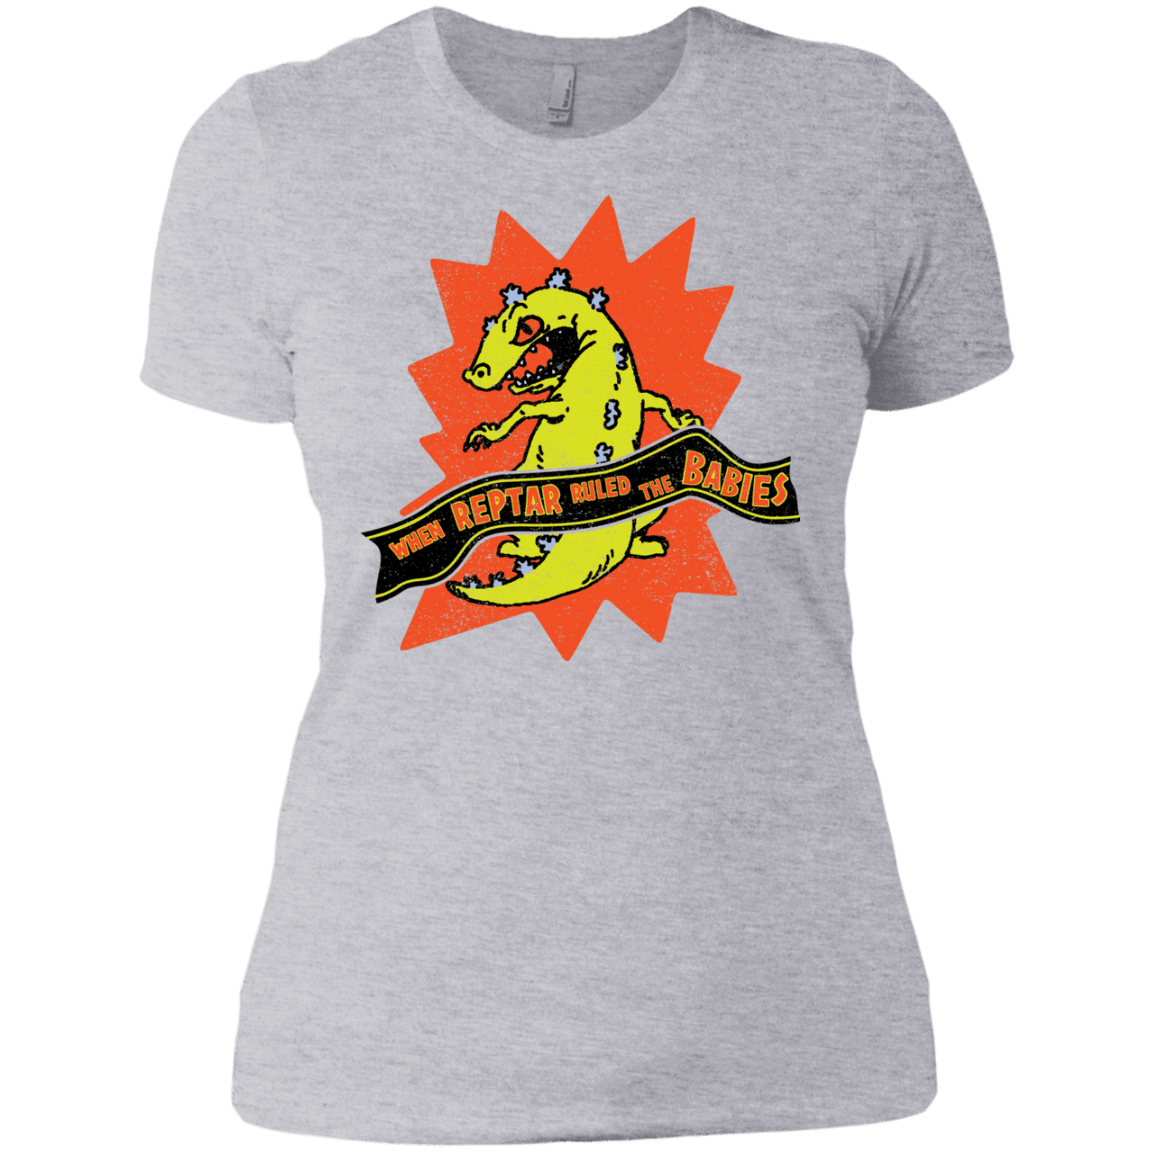 T-Shirts Heather Grey / X-Small When Reptar Ruled The Babies Women's Premium T-Shirt